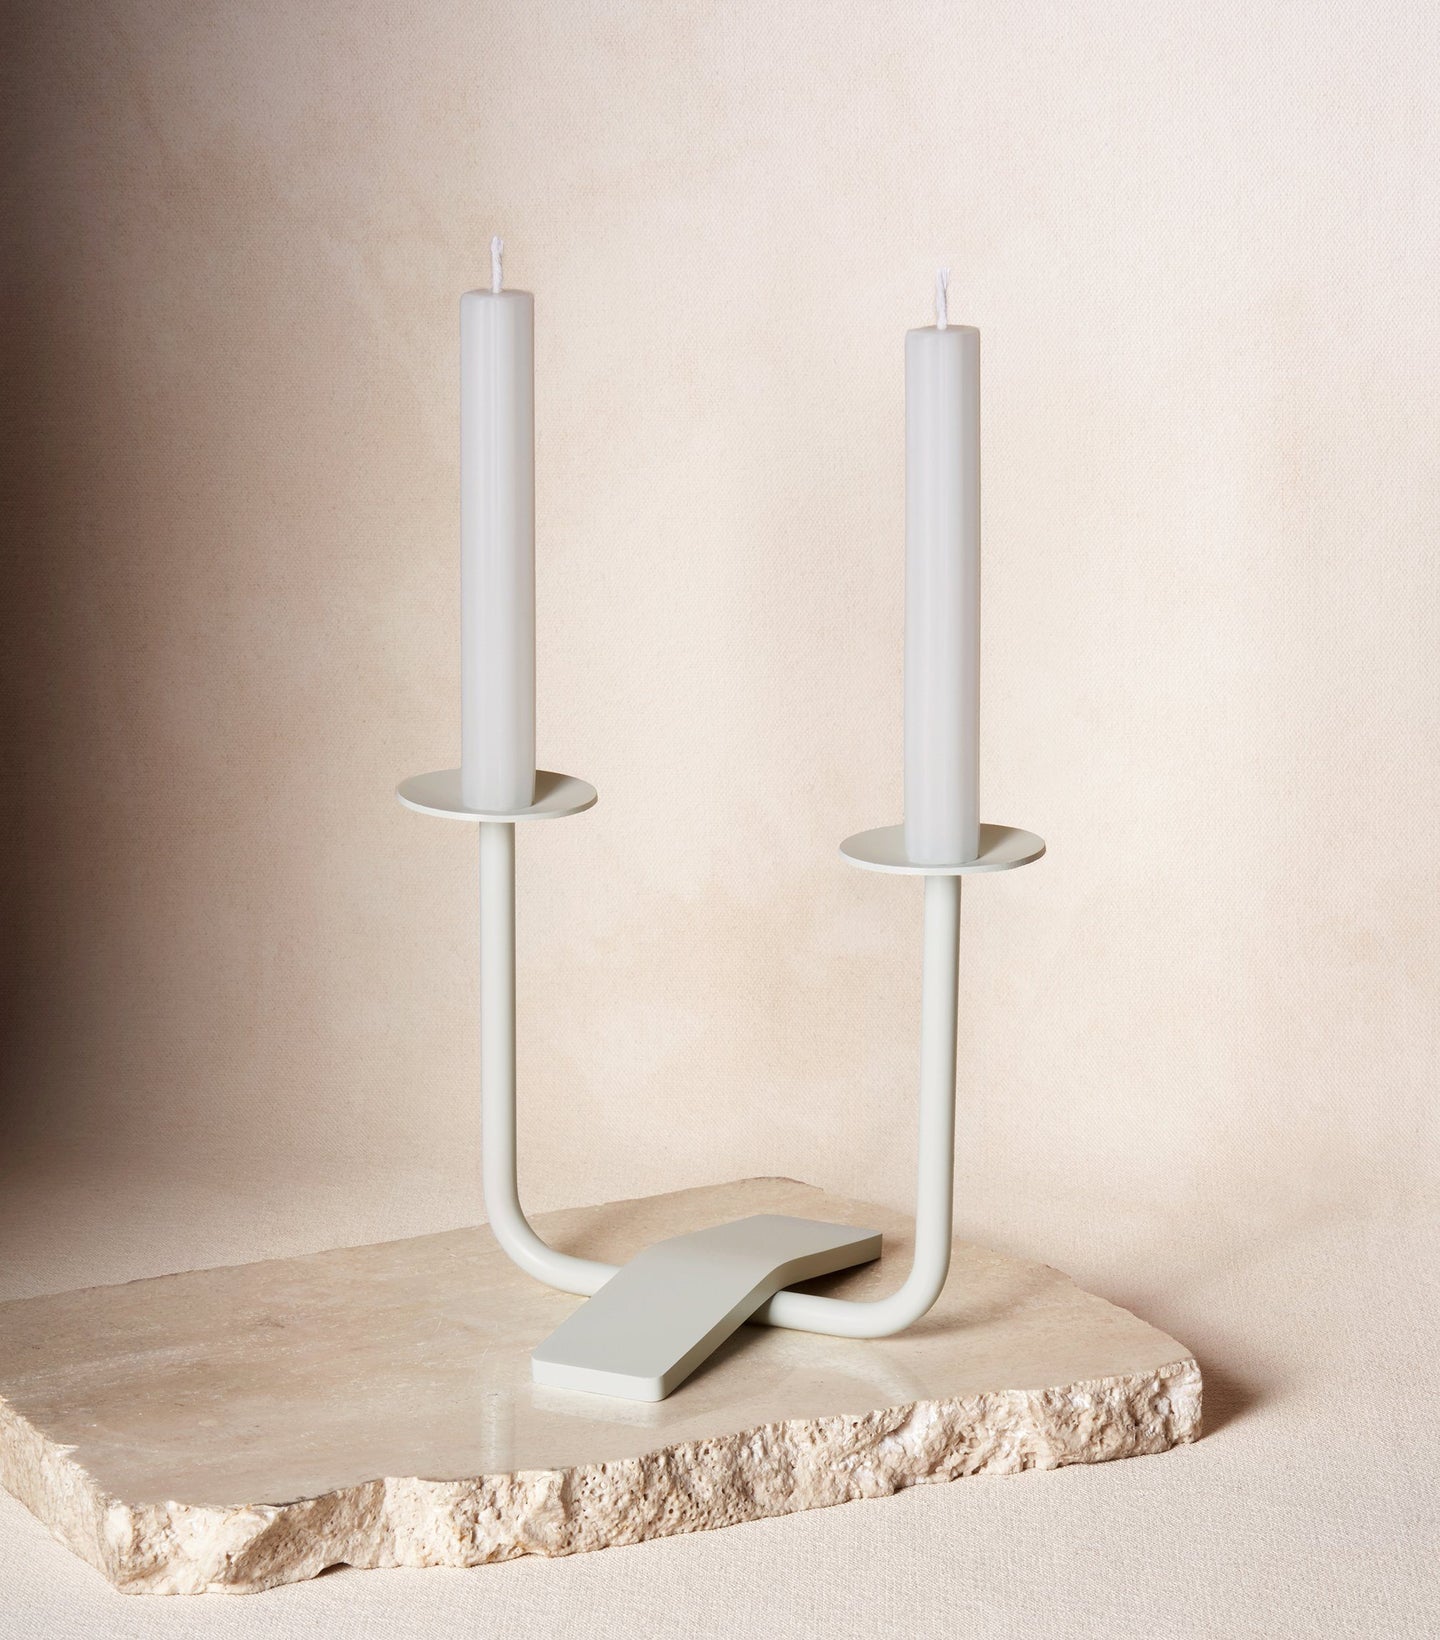 Load image into Gallery viewer, Two Shabbat Candles in Cloud White with Candle Holder
